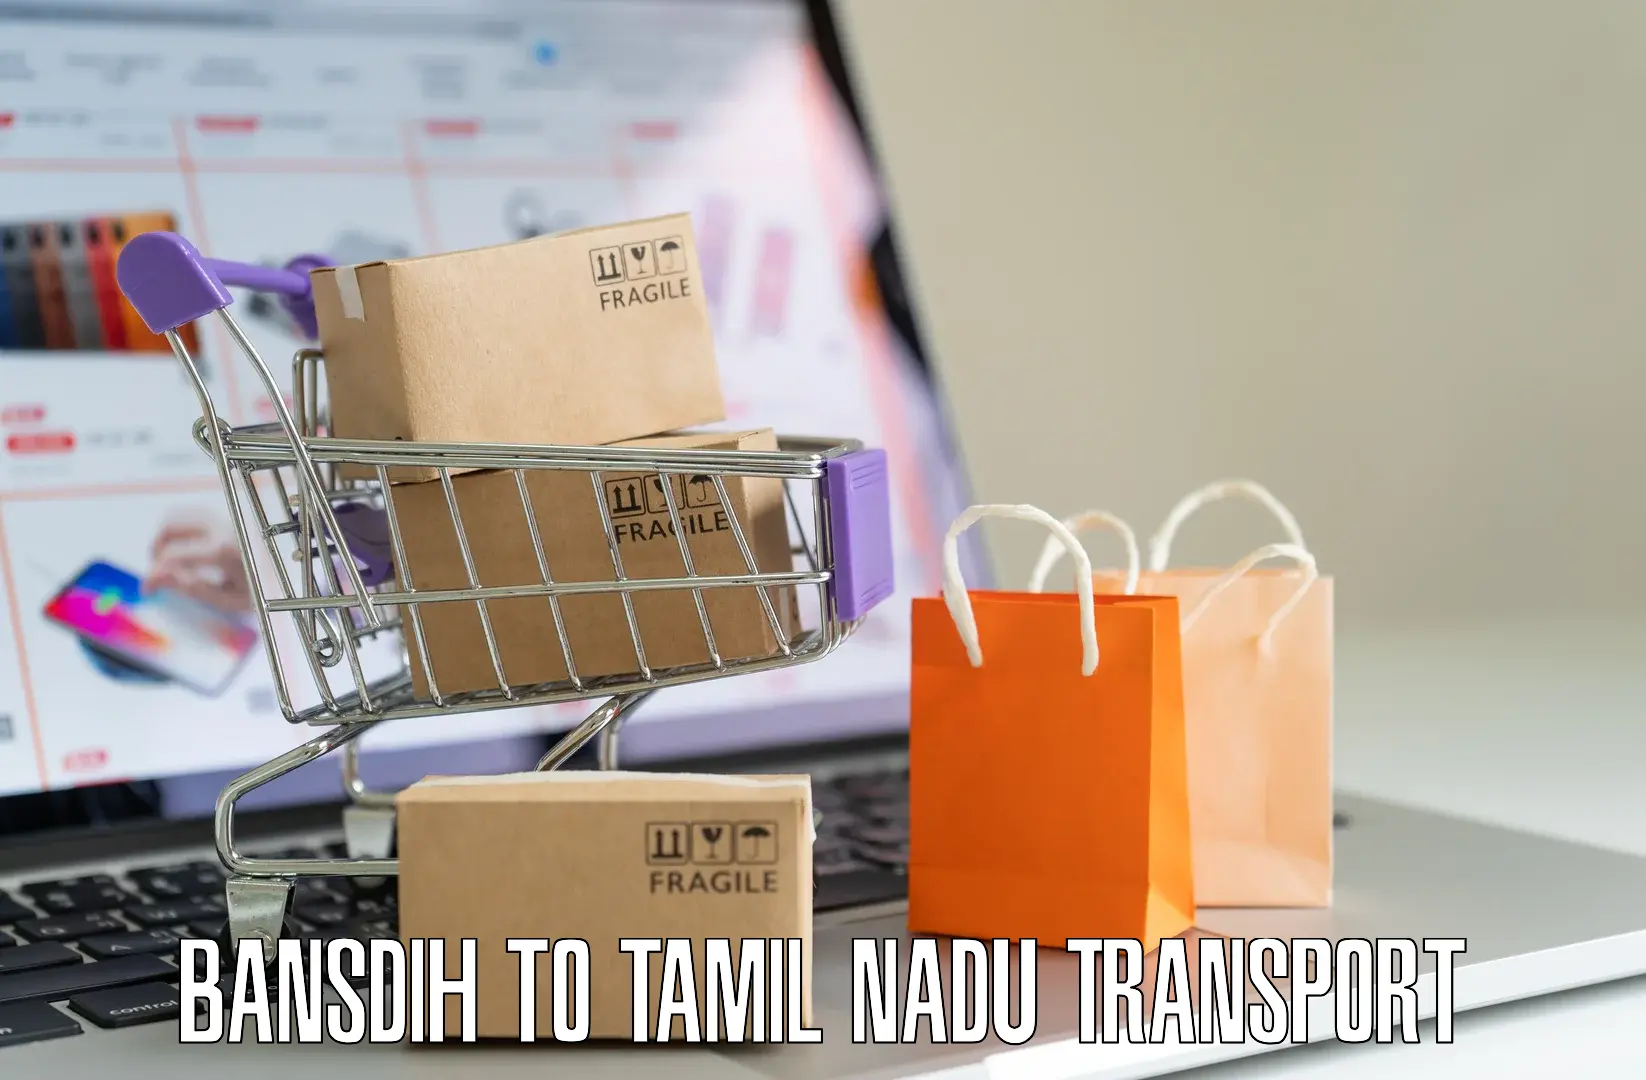 Road transport services Bansdih to Vellore Institute of Technology